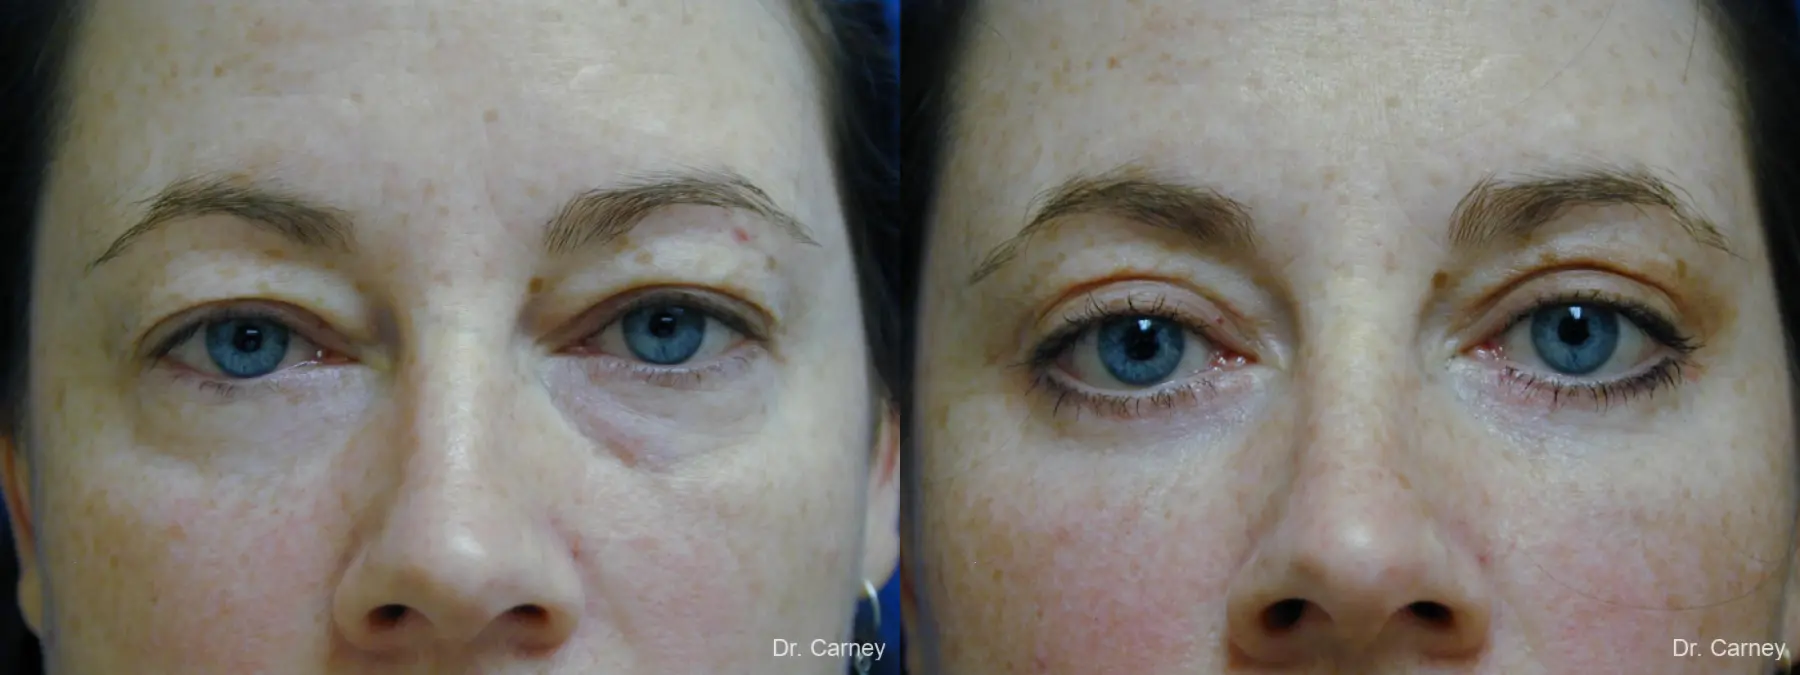 Virginia Beach Eyelid Lift 1138 - Before and After